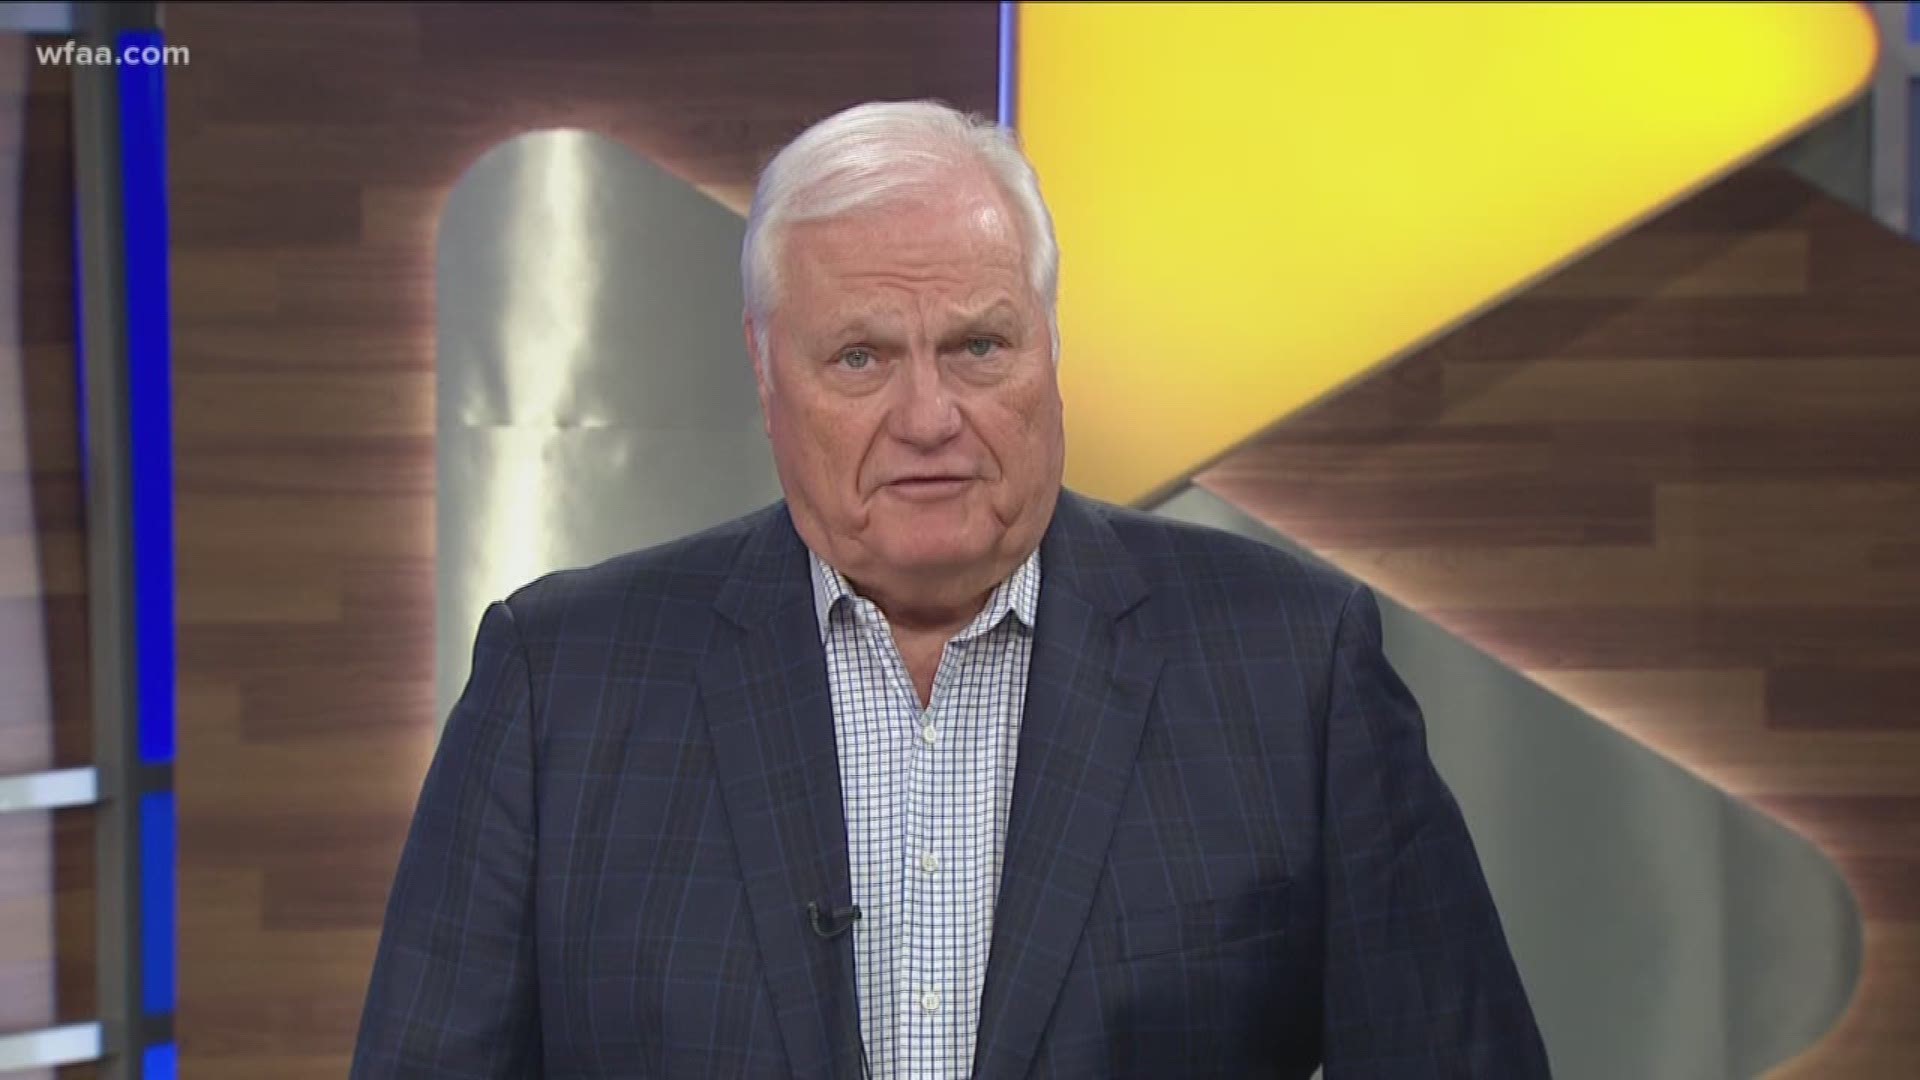 Dale Hansen commentary: 'Racism alive, well' in America